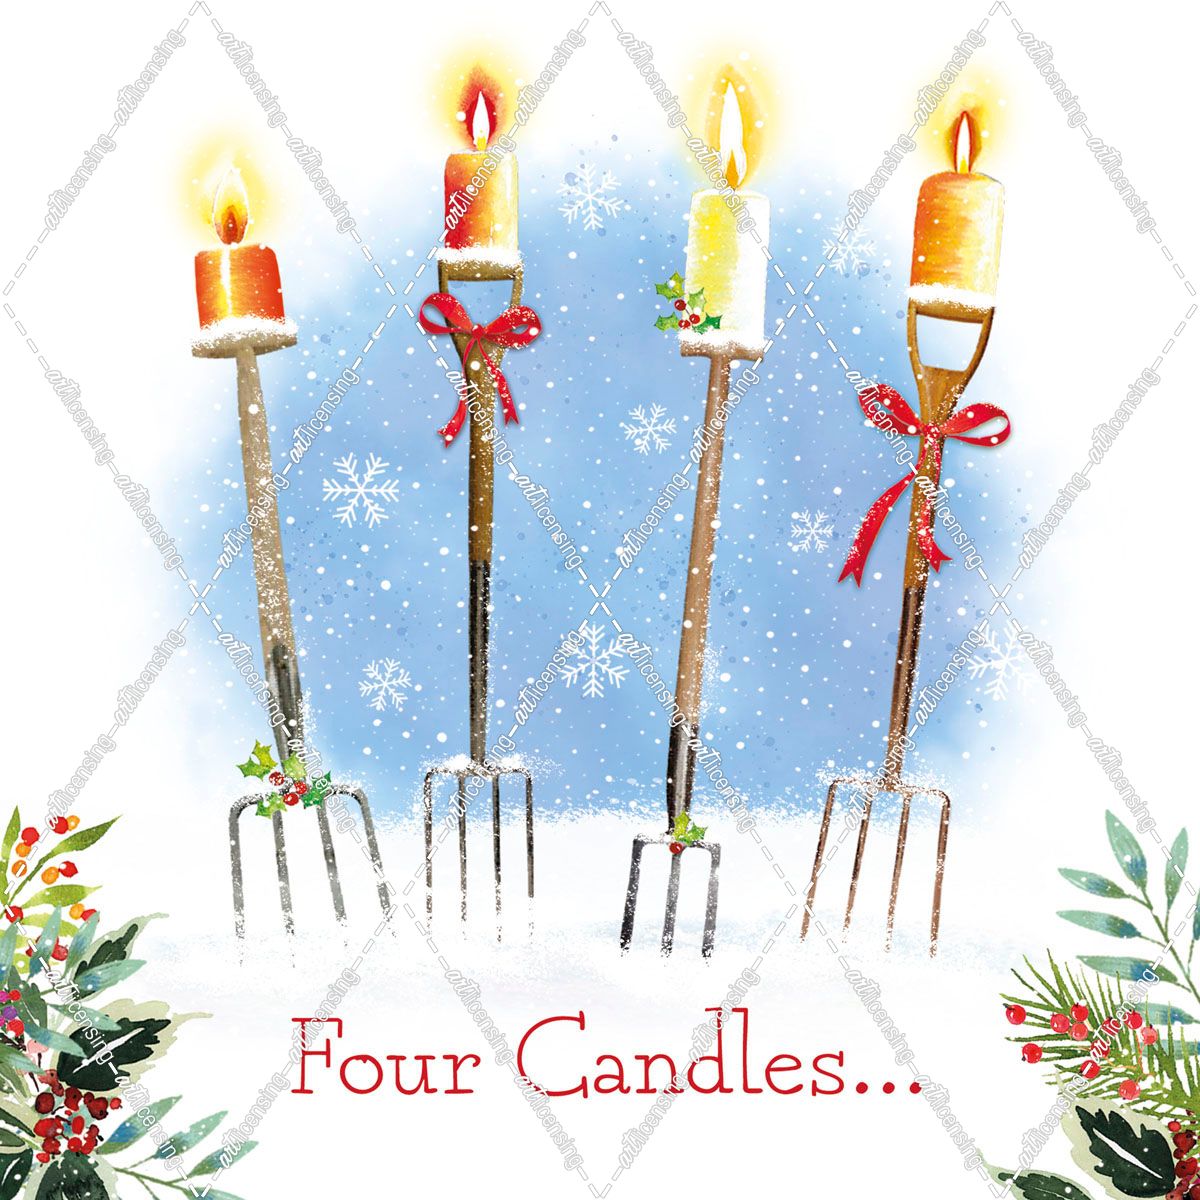 ELX21410 – Four Candles in the Snow